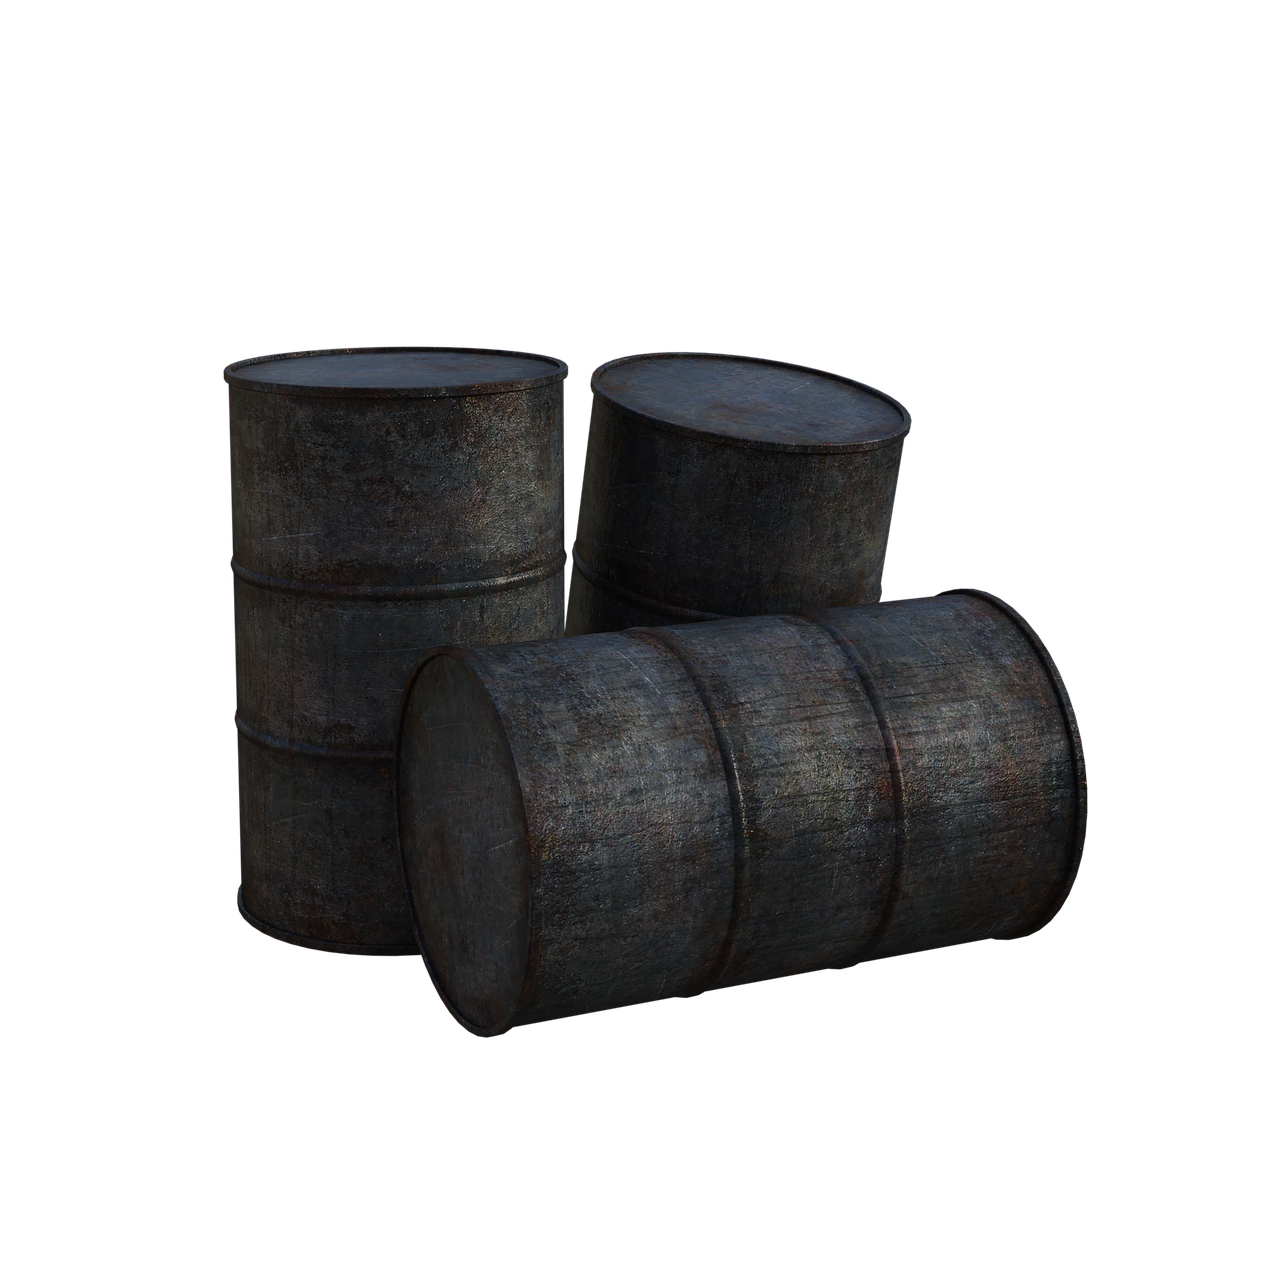 oil barrels  old  rusted free photo